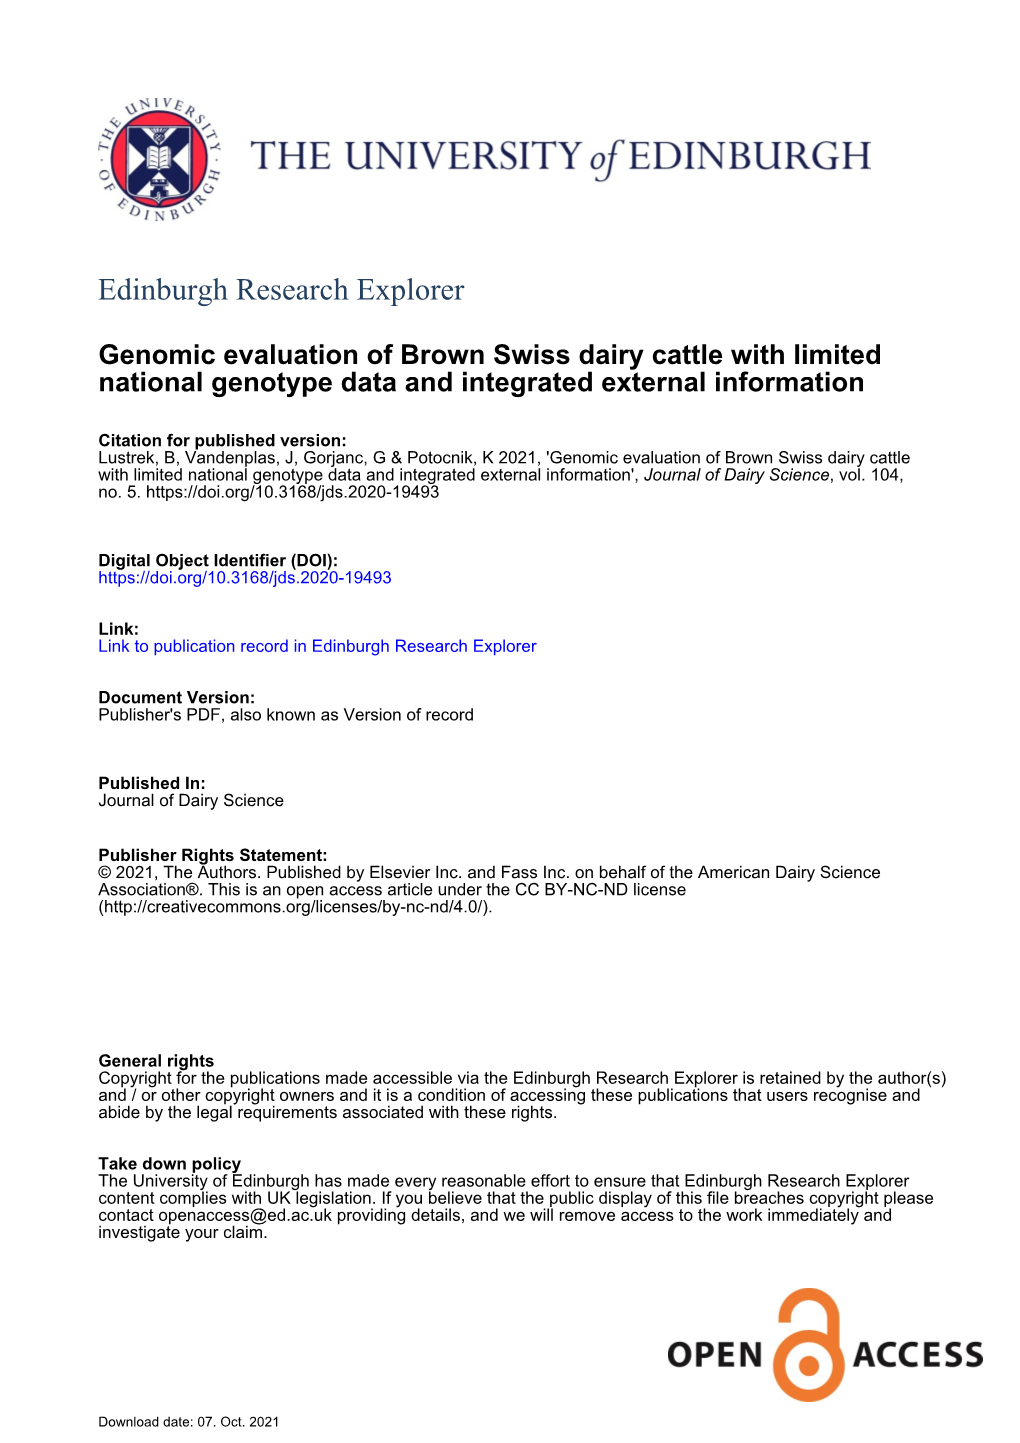 Genomic Evaluation of Brown Swiss Dairy Cattle with Limited National Genotype Data and Integrated External Information